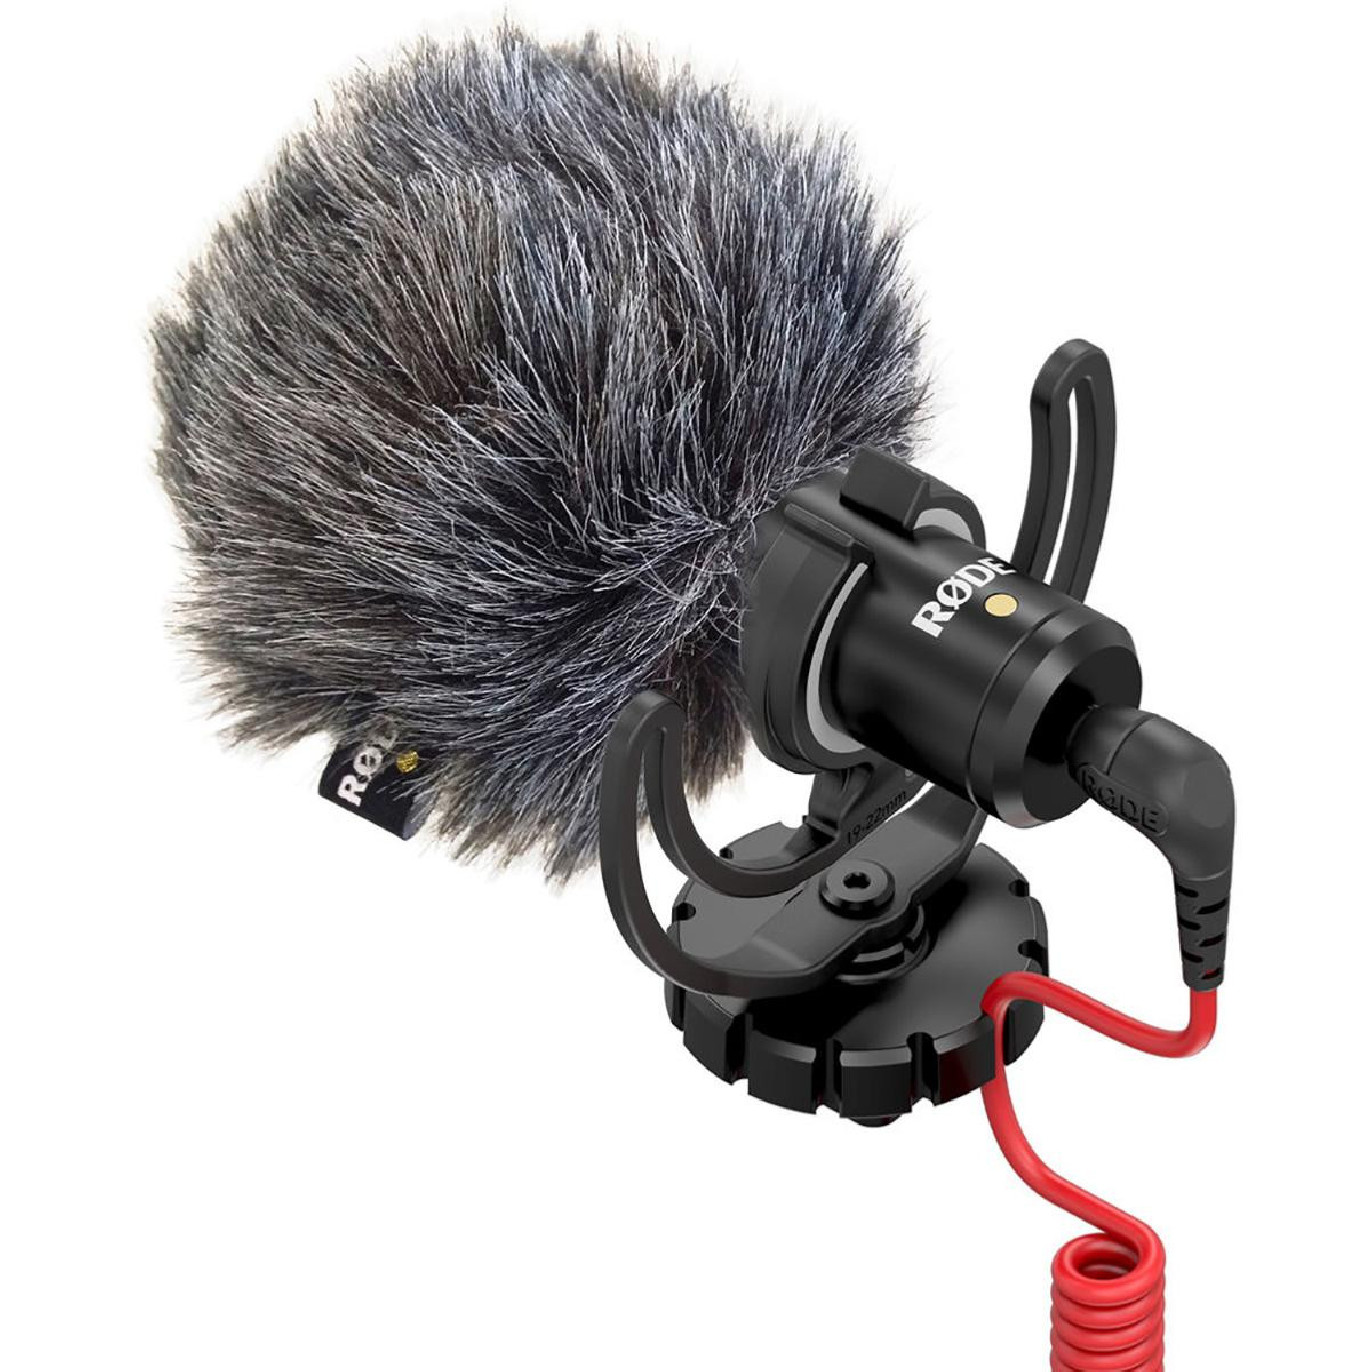 Rode Microphone Compact VideoMicro - Prophot